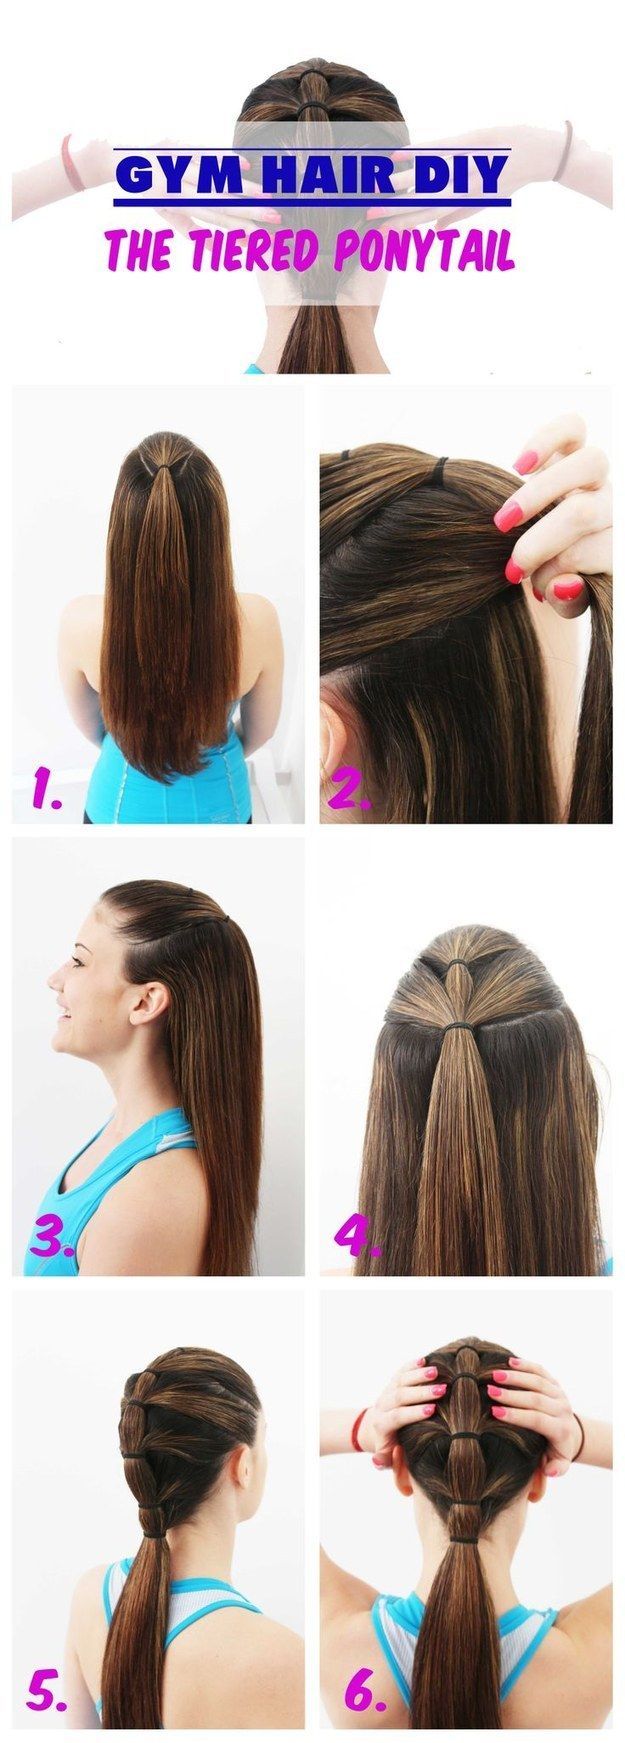 A tiered ponytail will keep everything in its rightful place. | 18 Ingenious Hair Hacks For The Gym